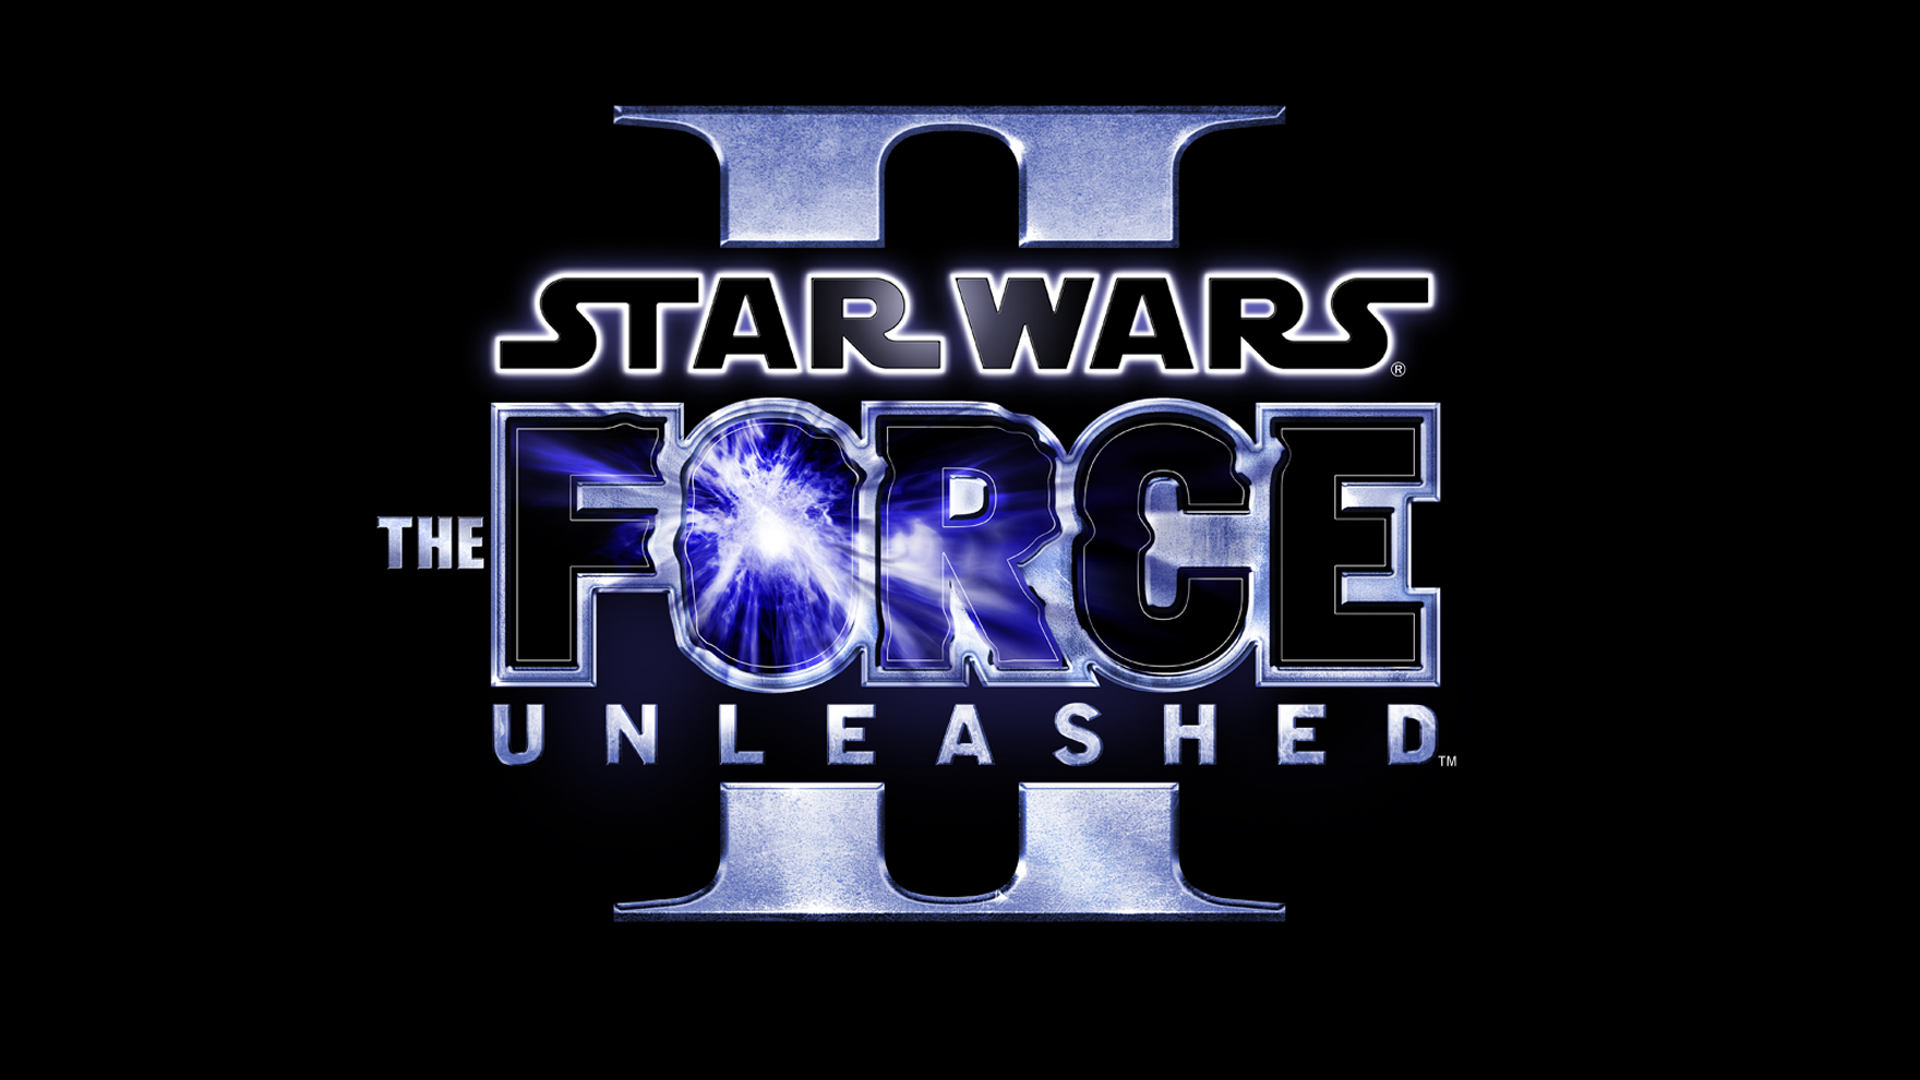 Star Wars: The Force Unleashed II Logo